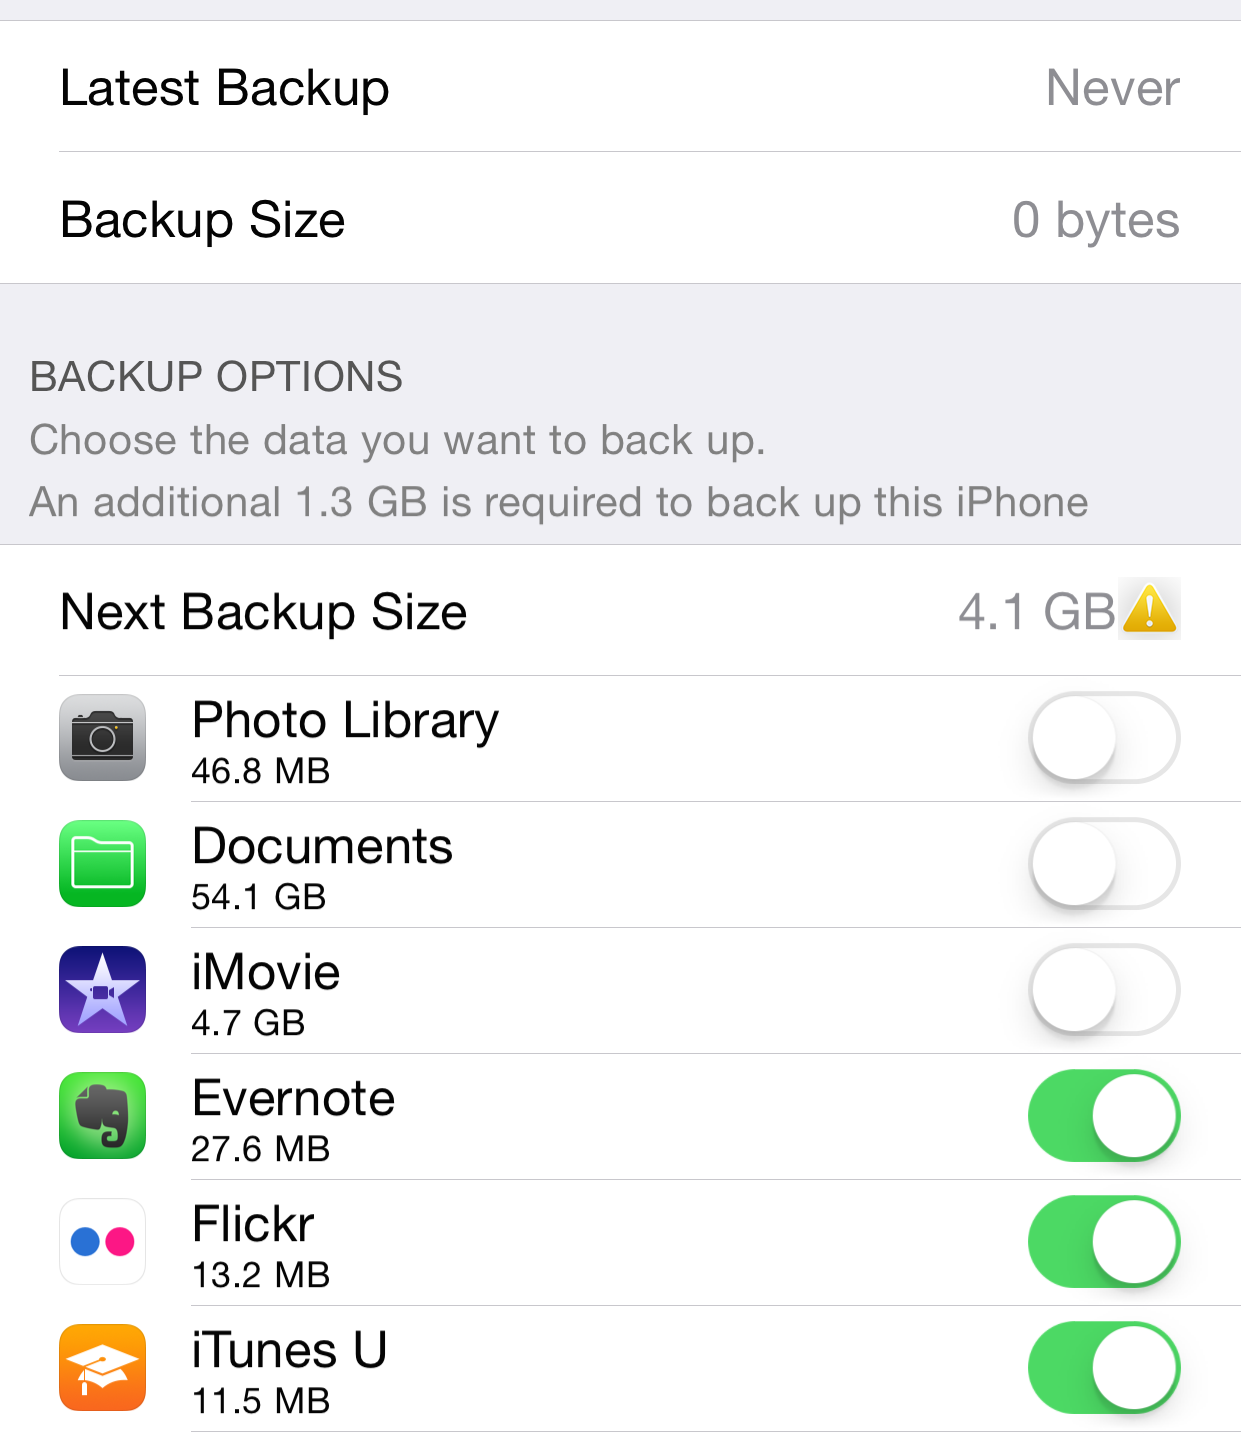 Next Backup Size is larger than actual items being backed up